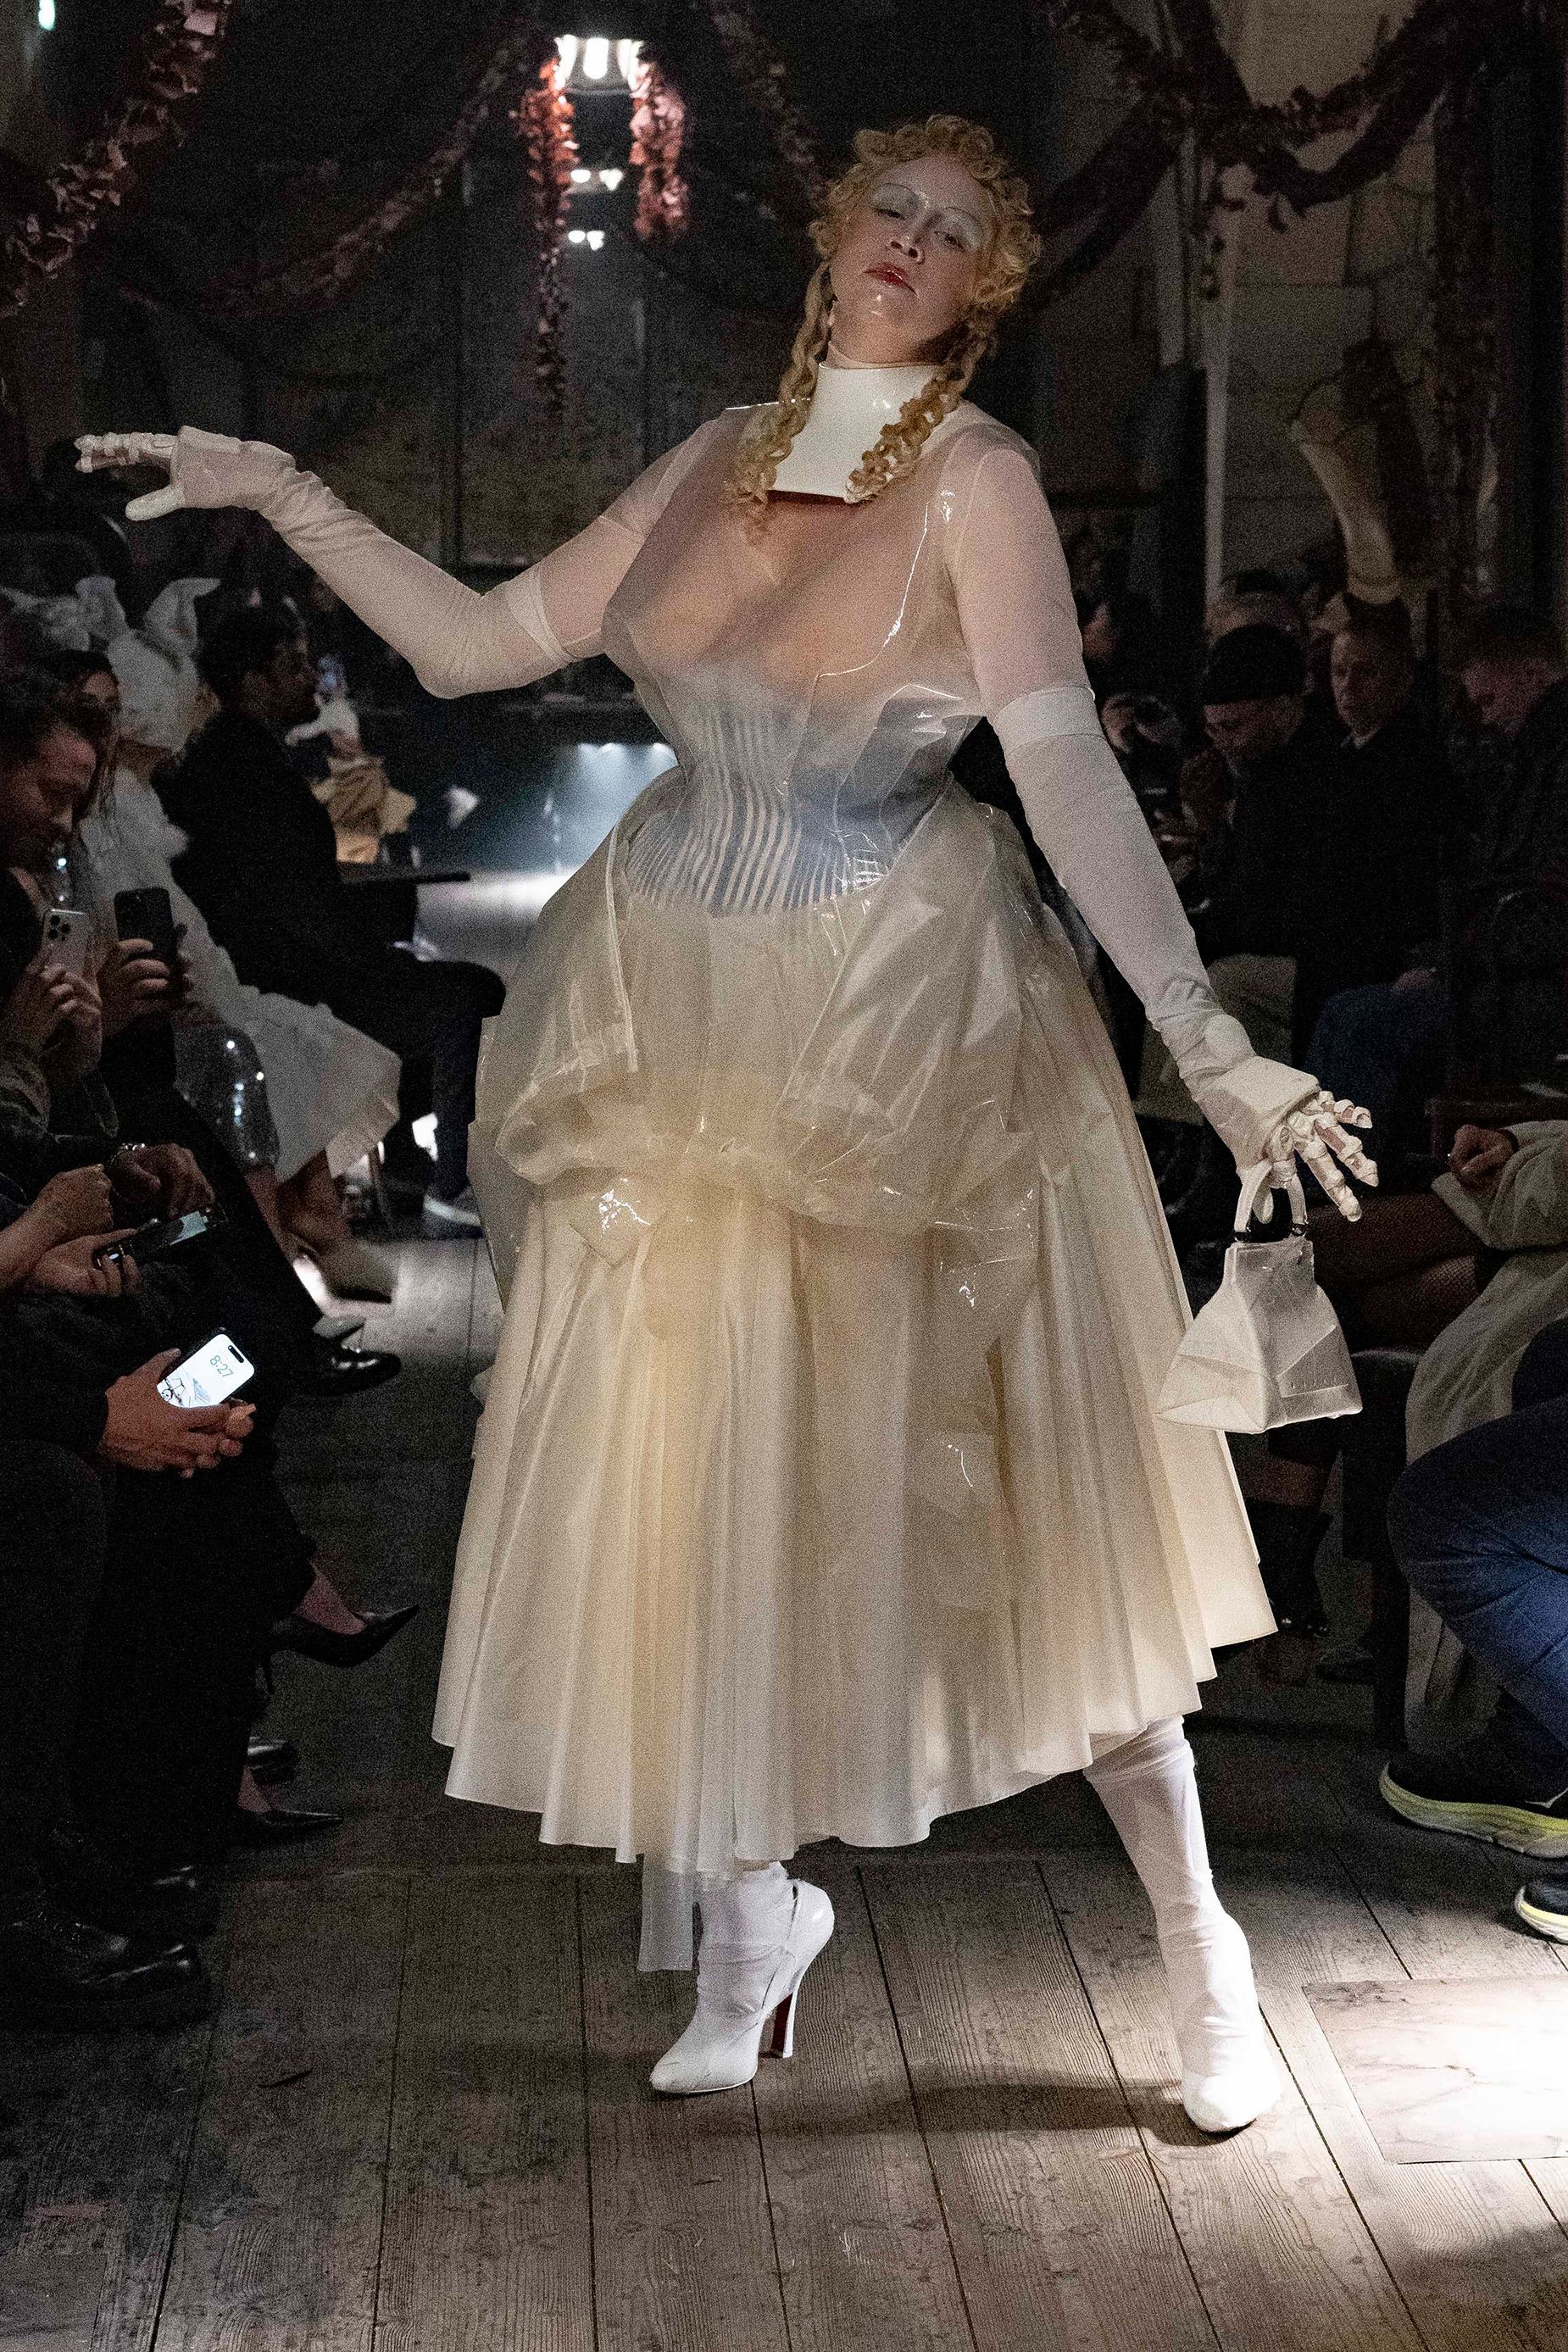 Gwendoline Christie closed John Galliano's show for Martin Margiela in a partially sheer corset-style dress.